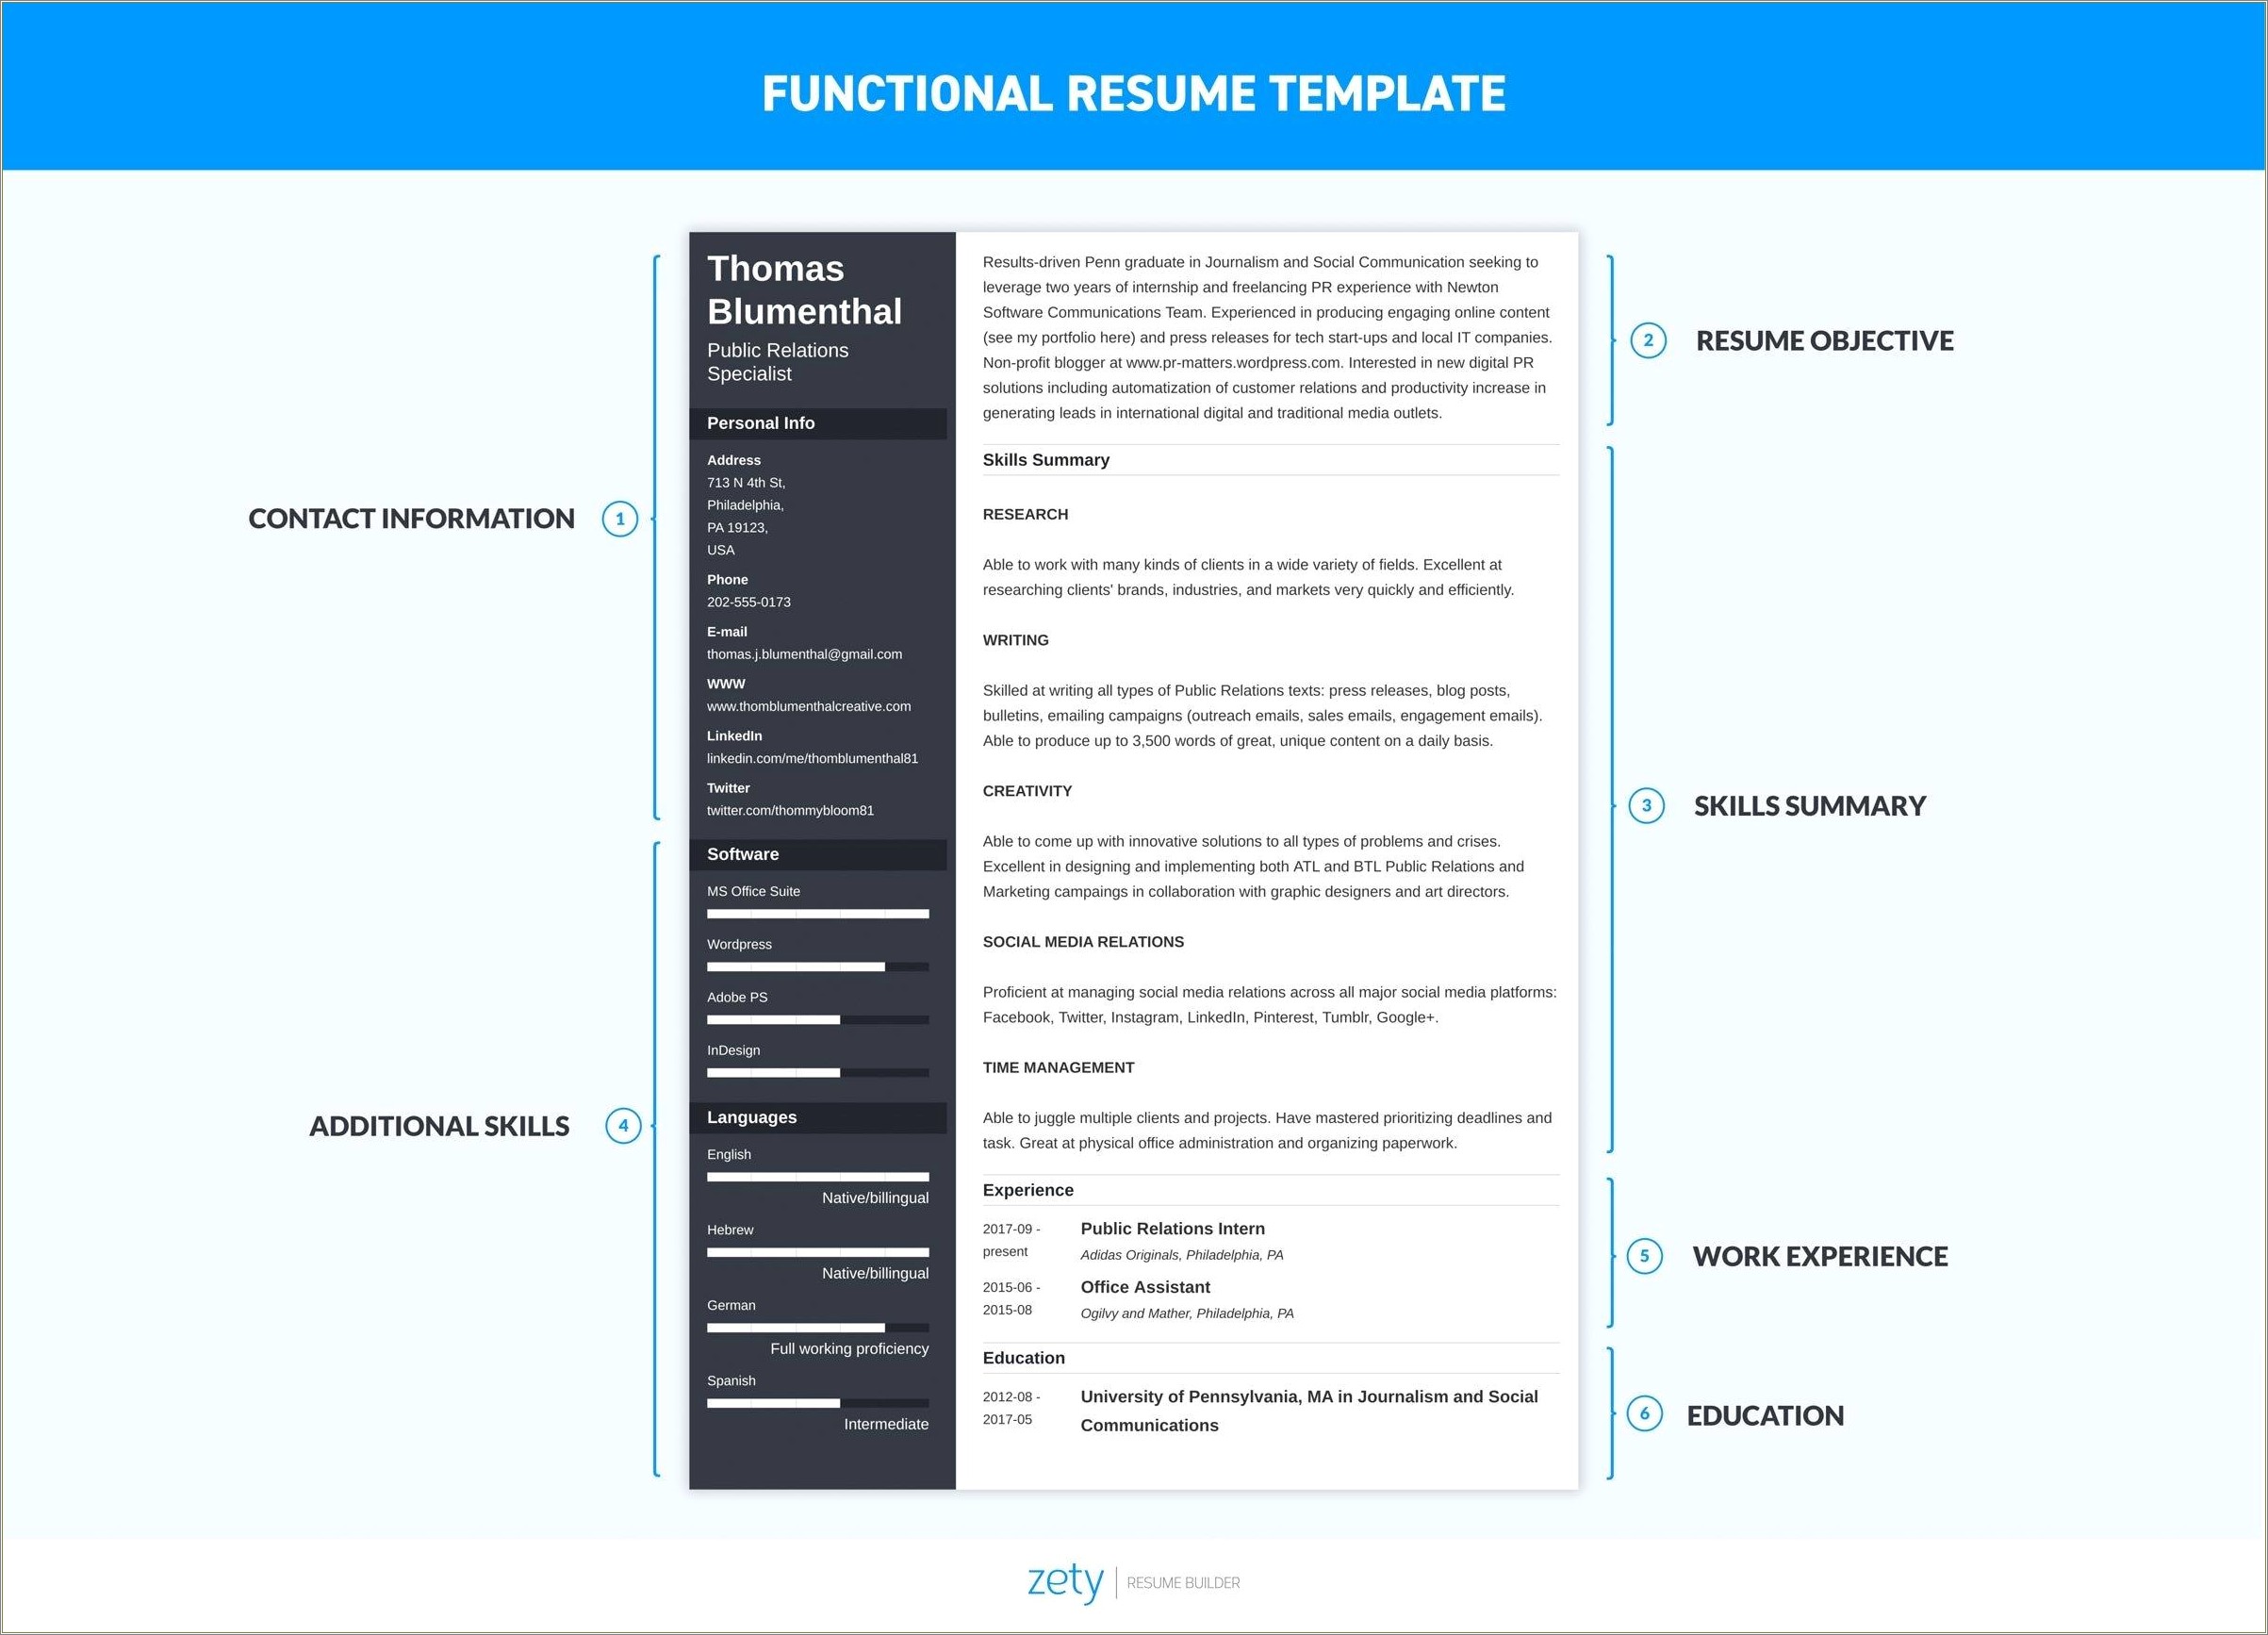 Create A Functional Resume For Free